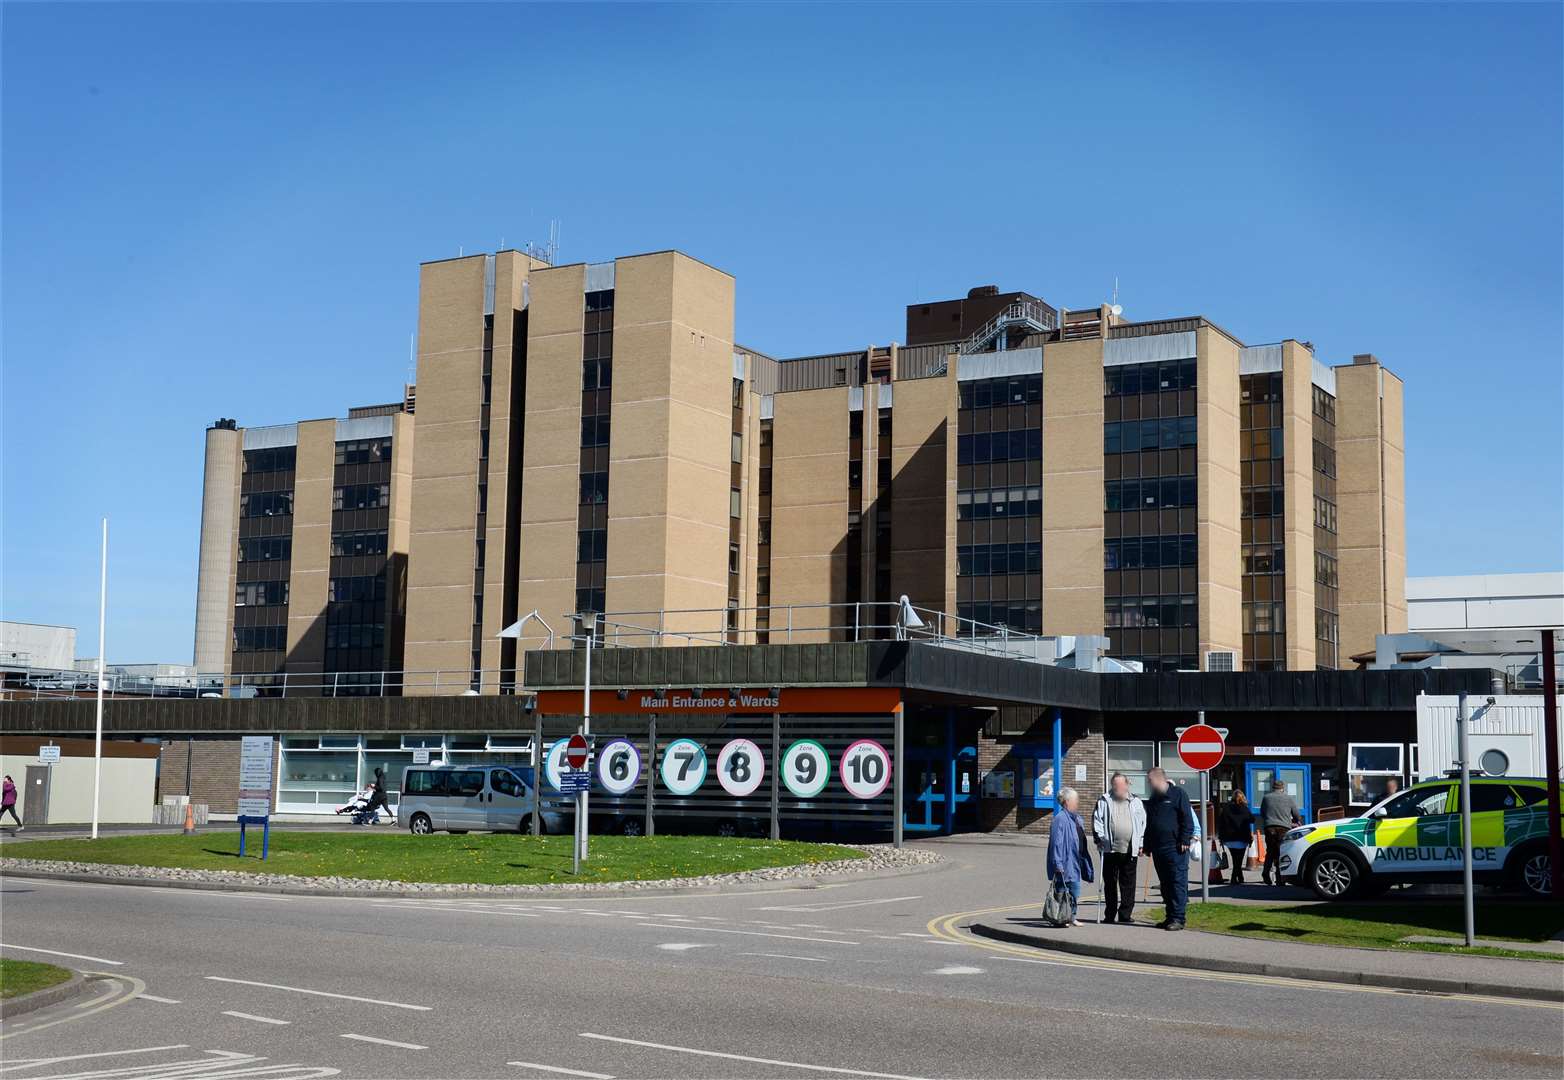 Hospitals, including Raigmore Hospital in Inverness, are seeing increased pressure on services due to flu.